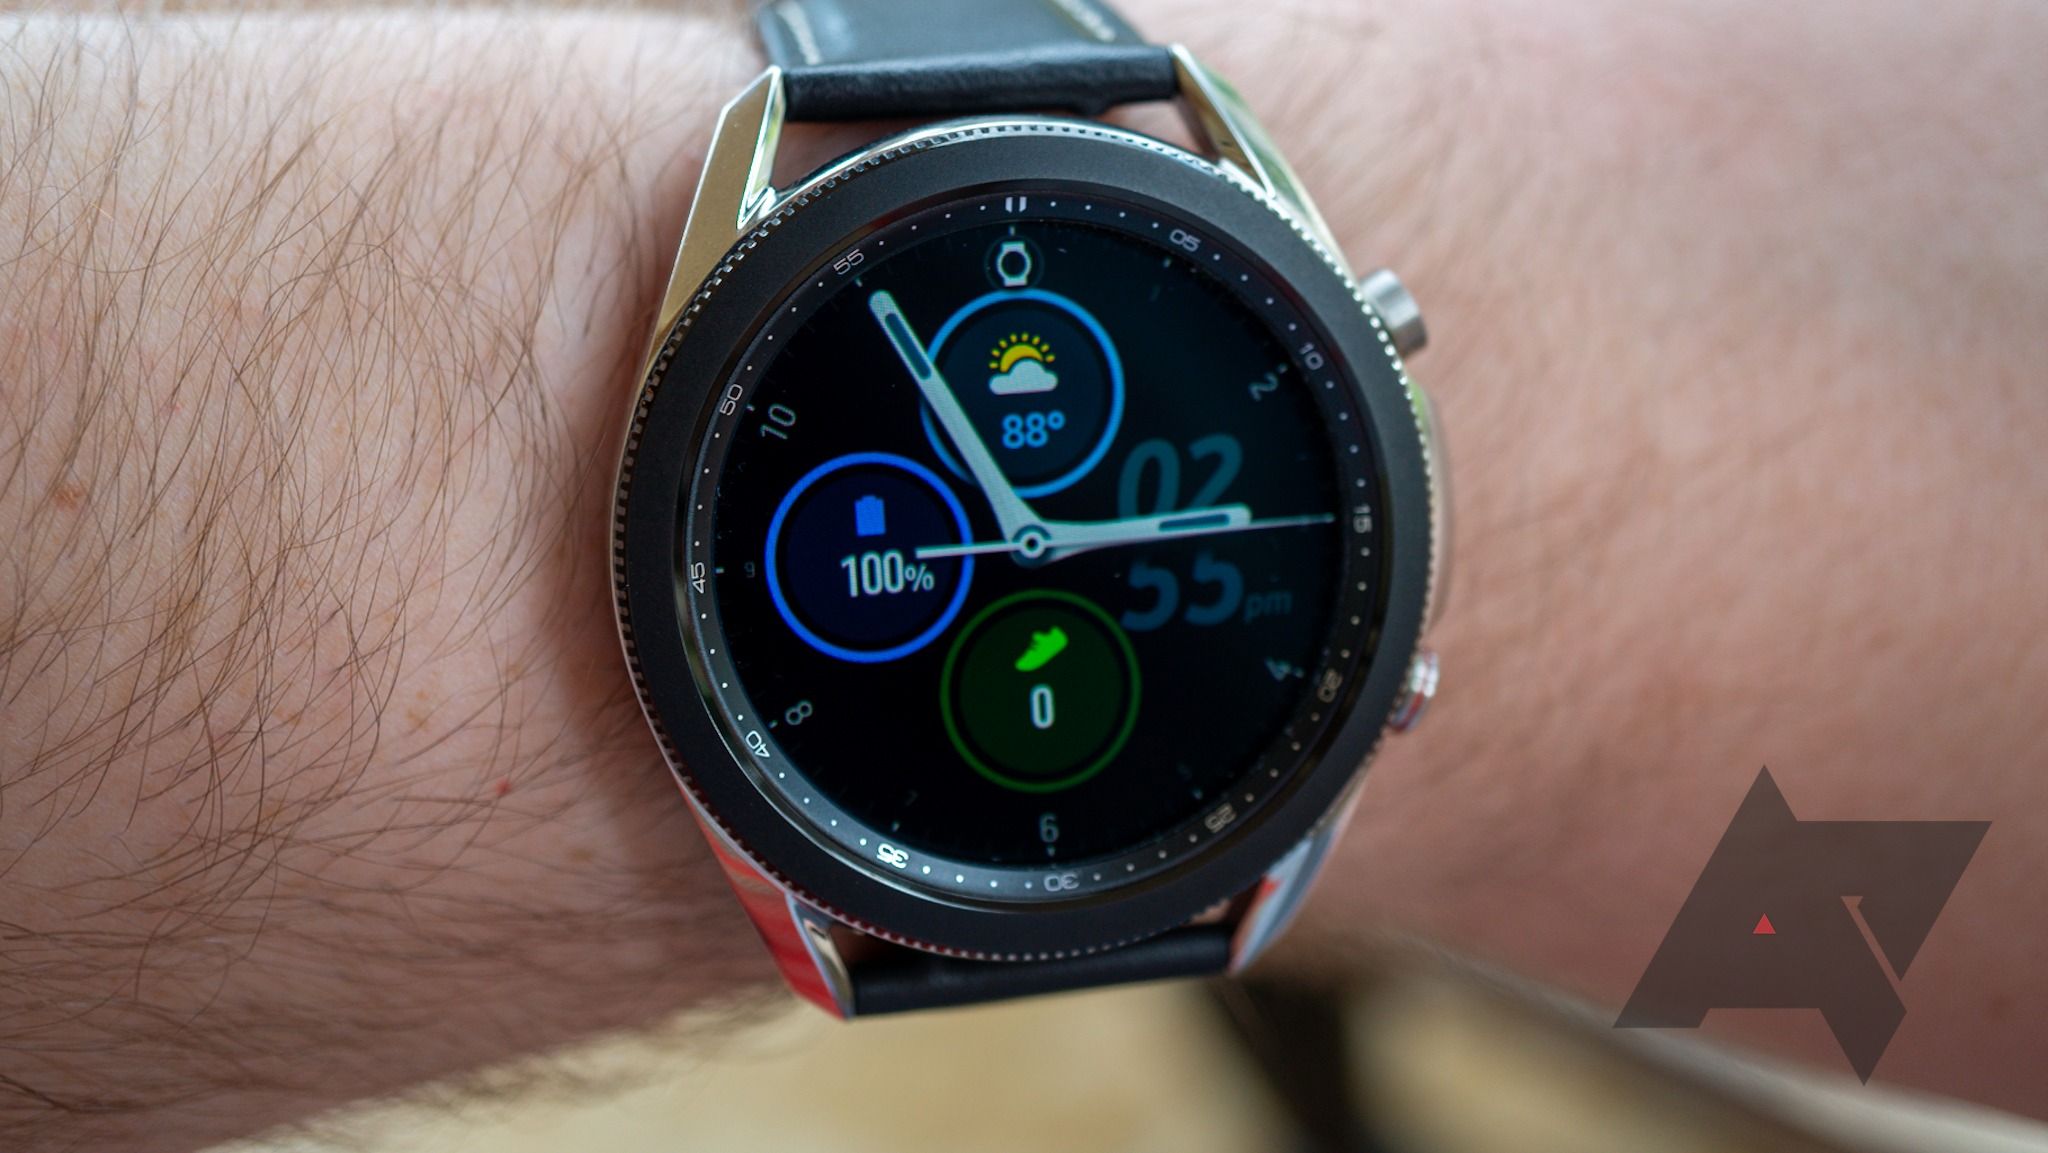 Your Samsung Galaxy Watch 3 is learning a thing or two from the Watch 5